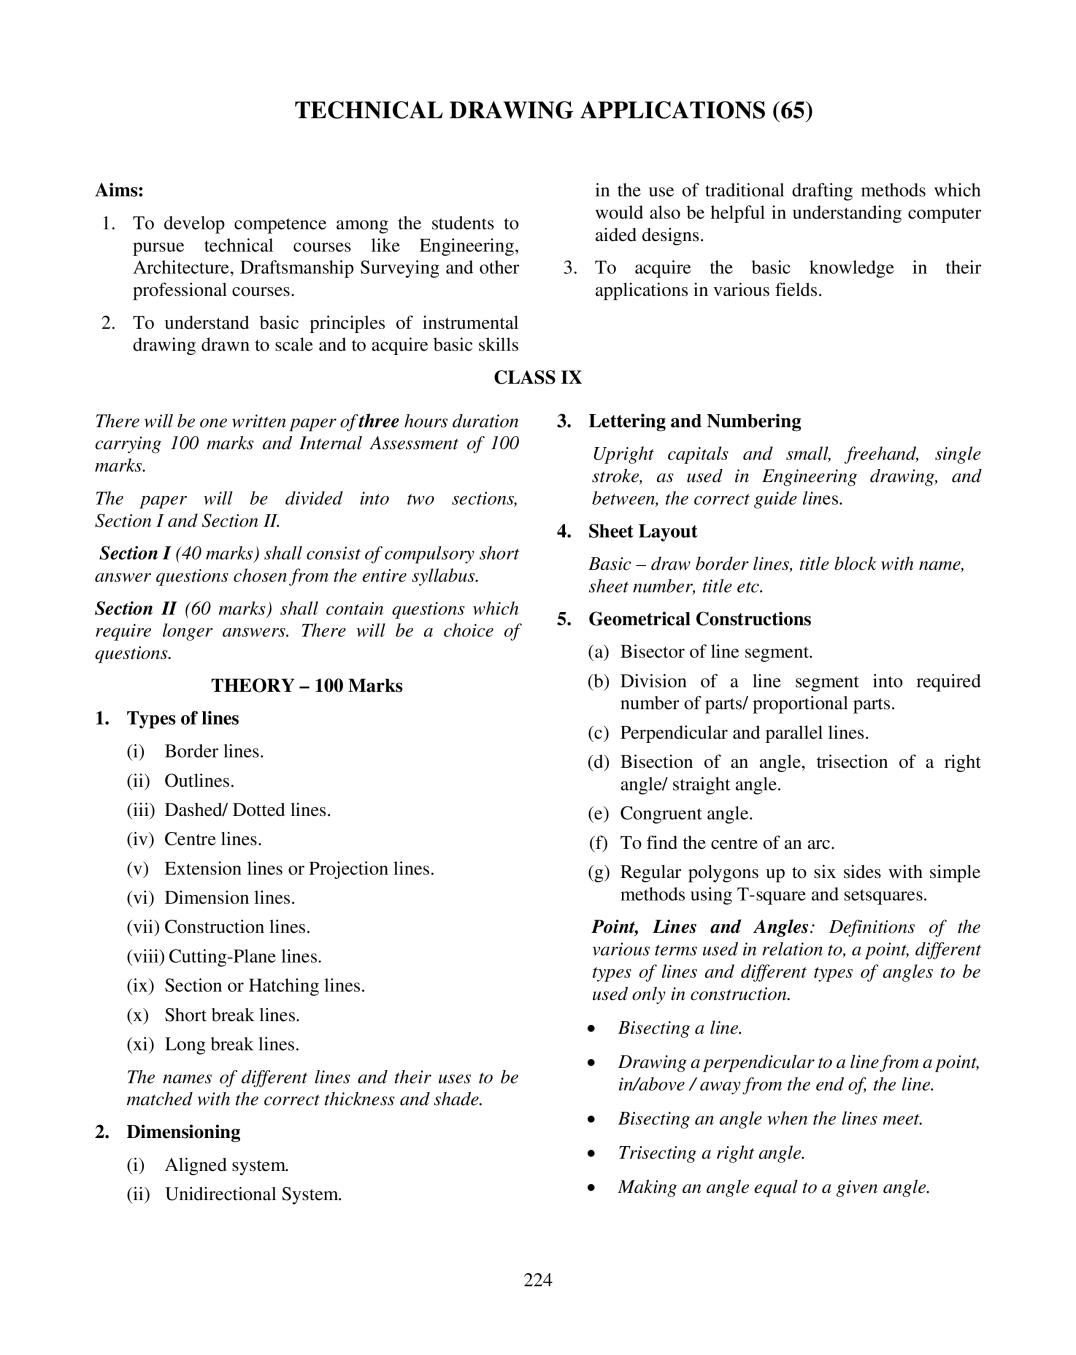 ICSE Class 10 Technical Drawing Applications Syllabus 2020 - Page 1